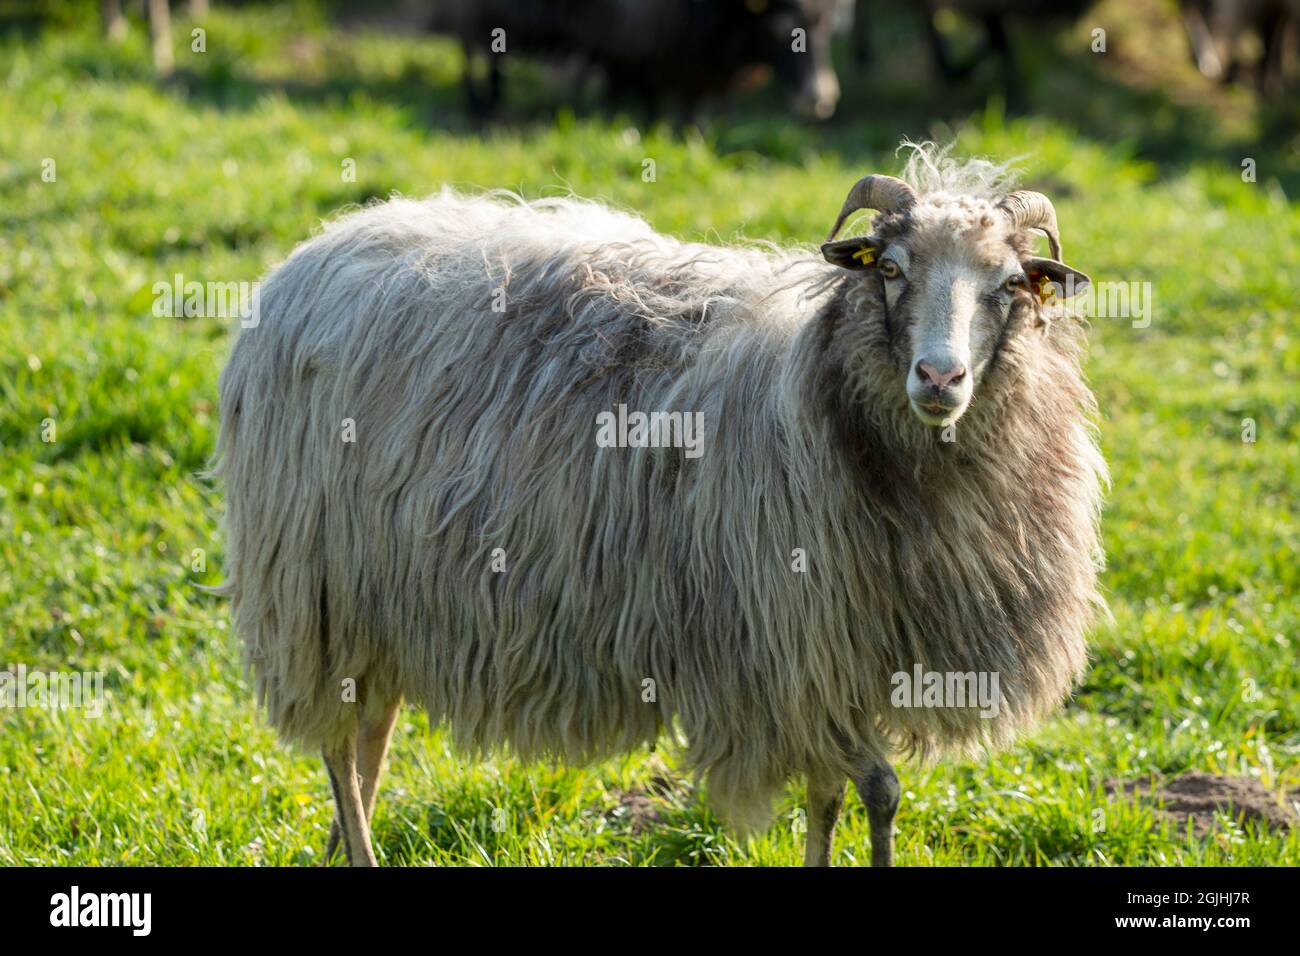 A little sheep on a meadow Stock Photo